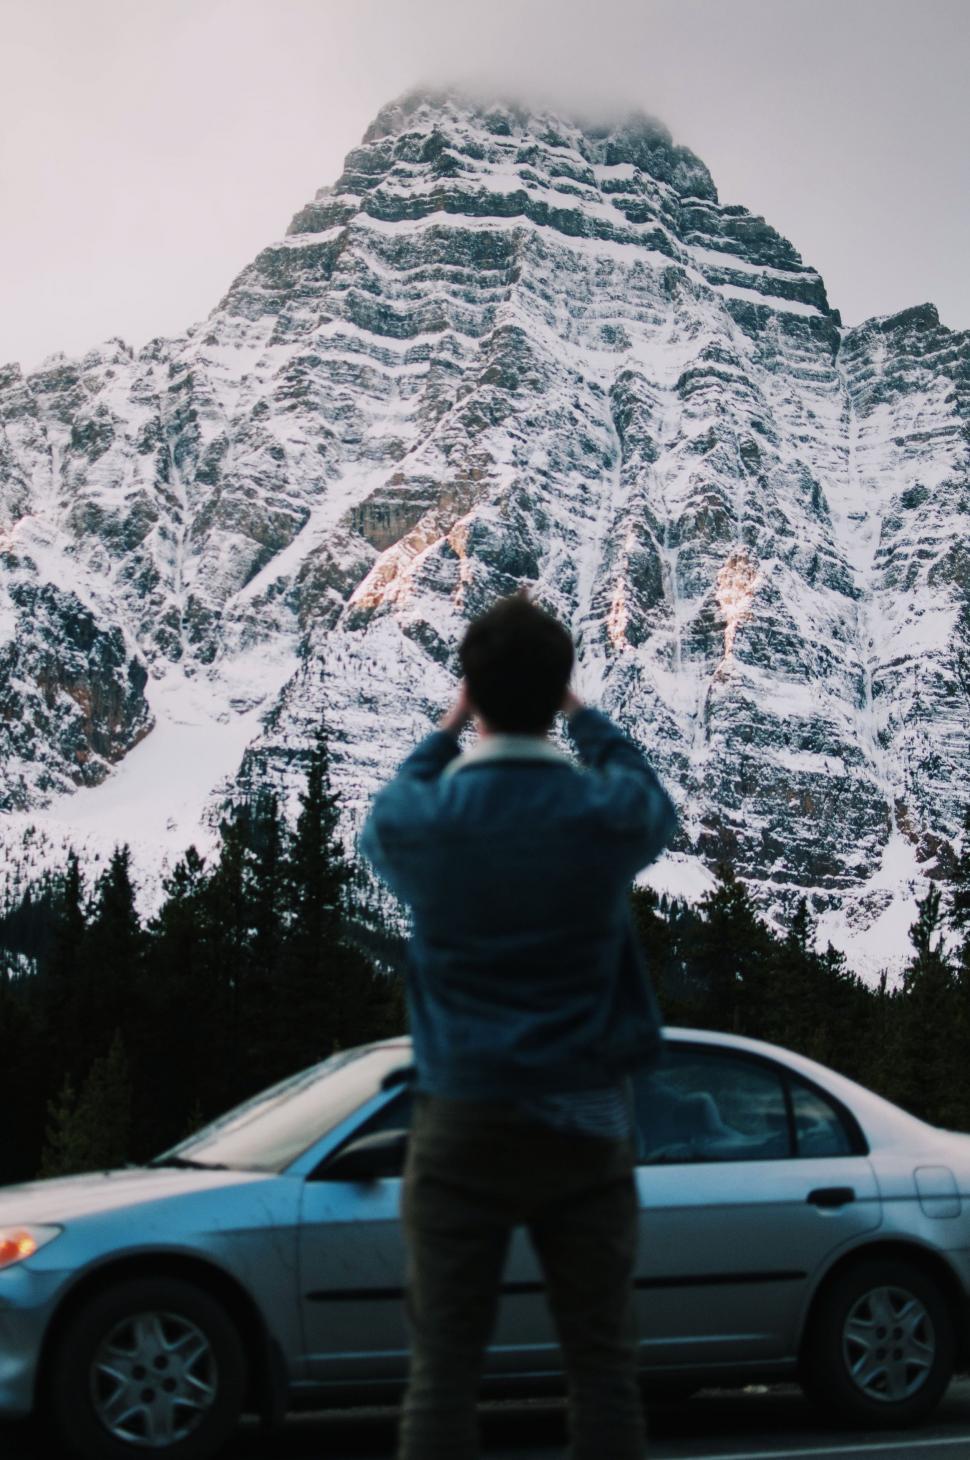 Free Image of Man Standing Next to Parked Car in Front of Snow Covered Mountain 